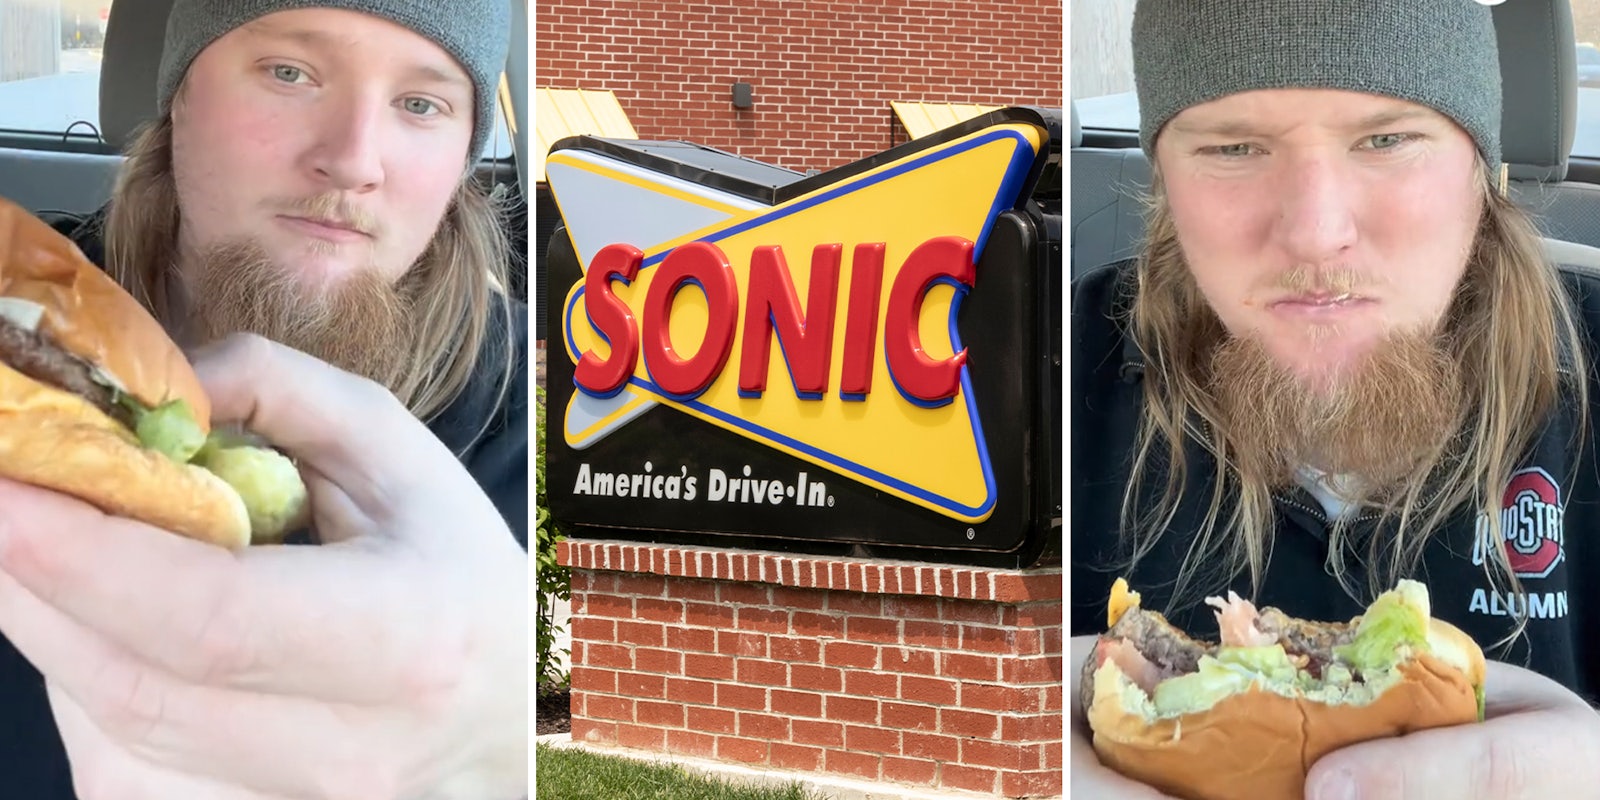 Food expert says Sonic cheeseburger was one of the 5 worst things he’s eaten